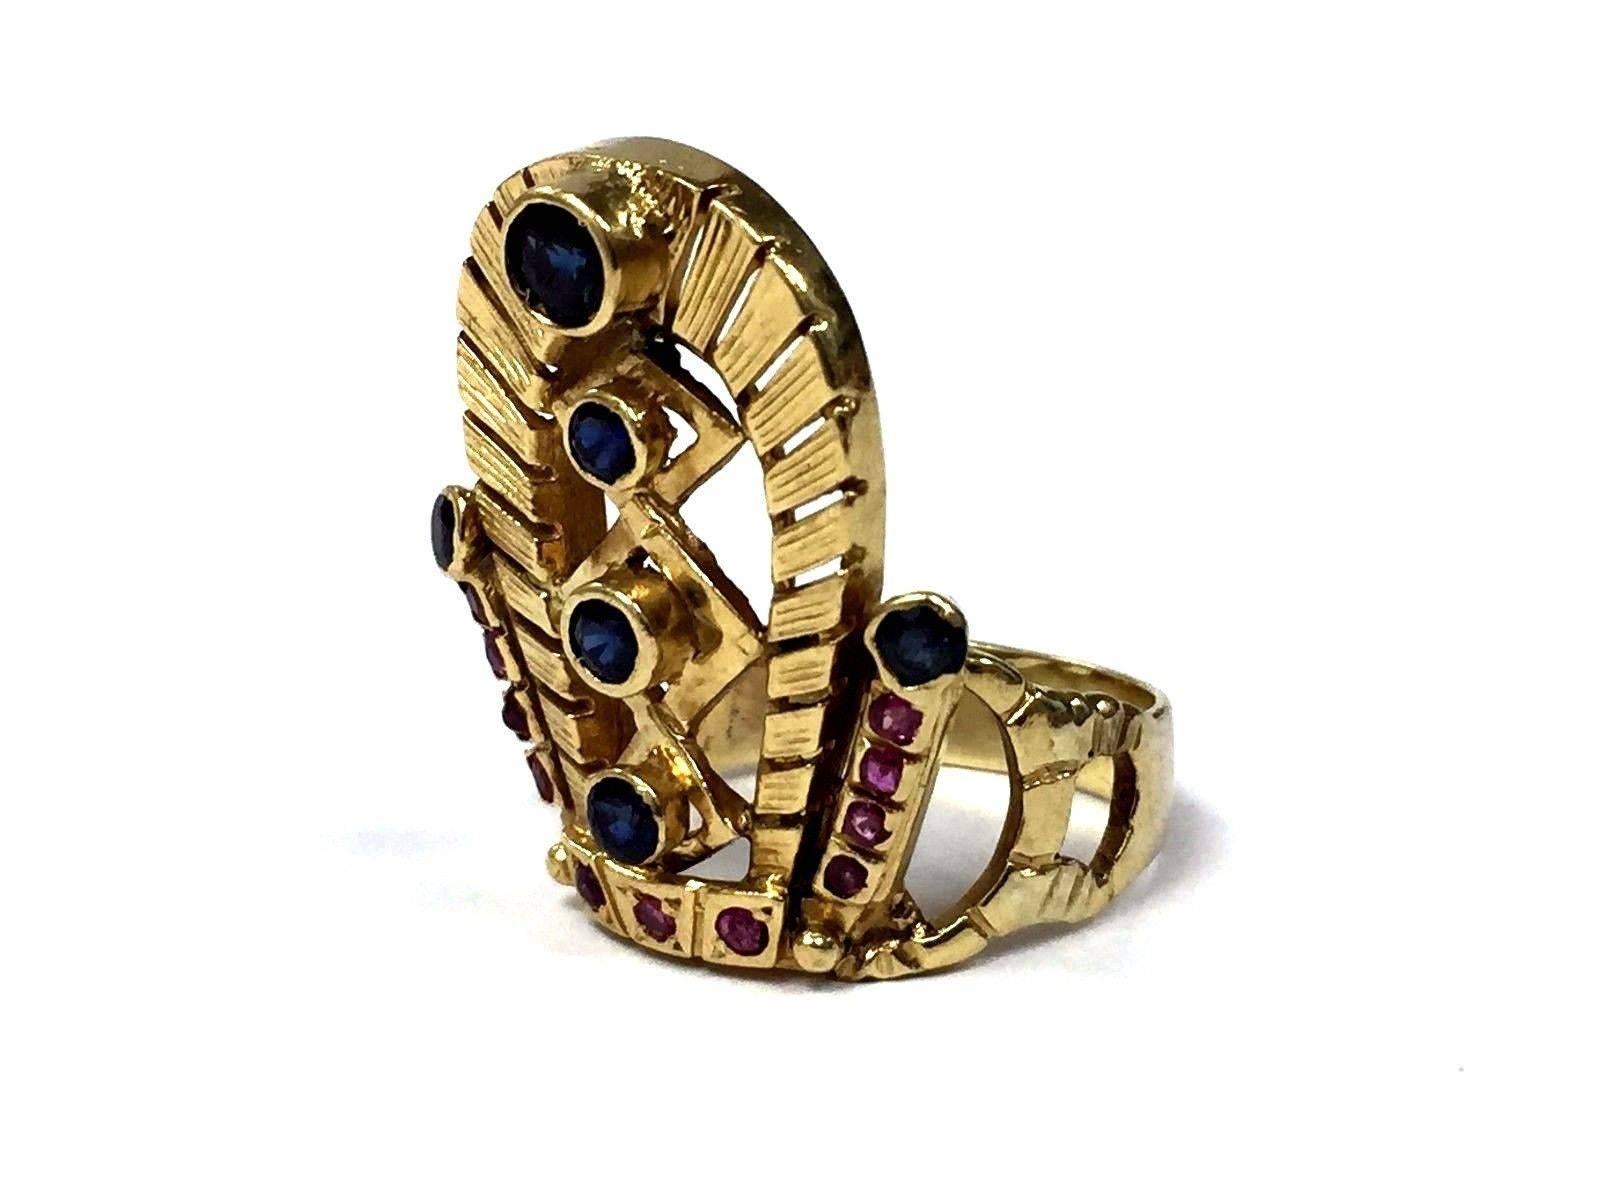 This unique ring depicts an Egyptian Pharaohs headdress crown and features blue sapphires and rubies set in solid 18-karat gold. The ring shank is solid 14-karat gold. Truly a beautiful and special ring in person.

Gemstones: Six round sapphires =